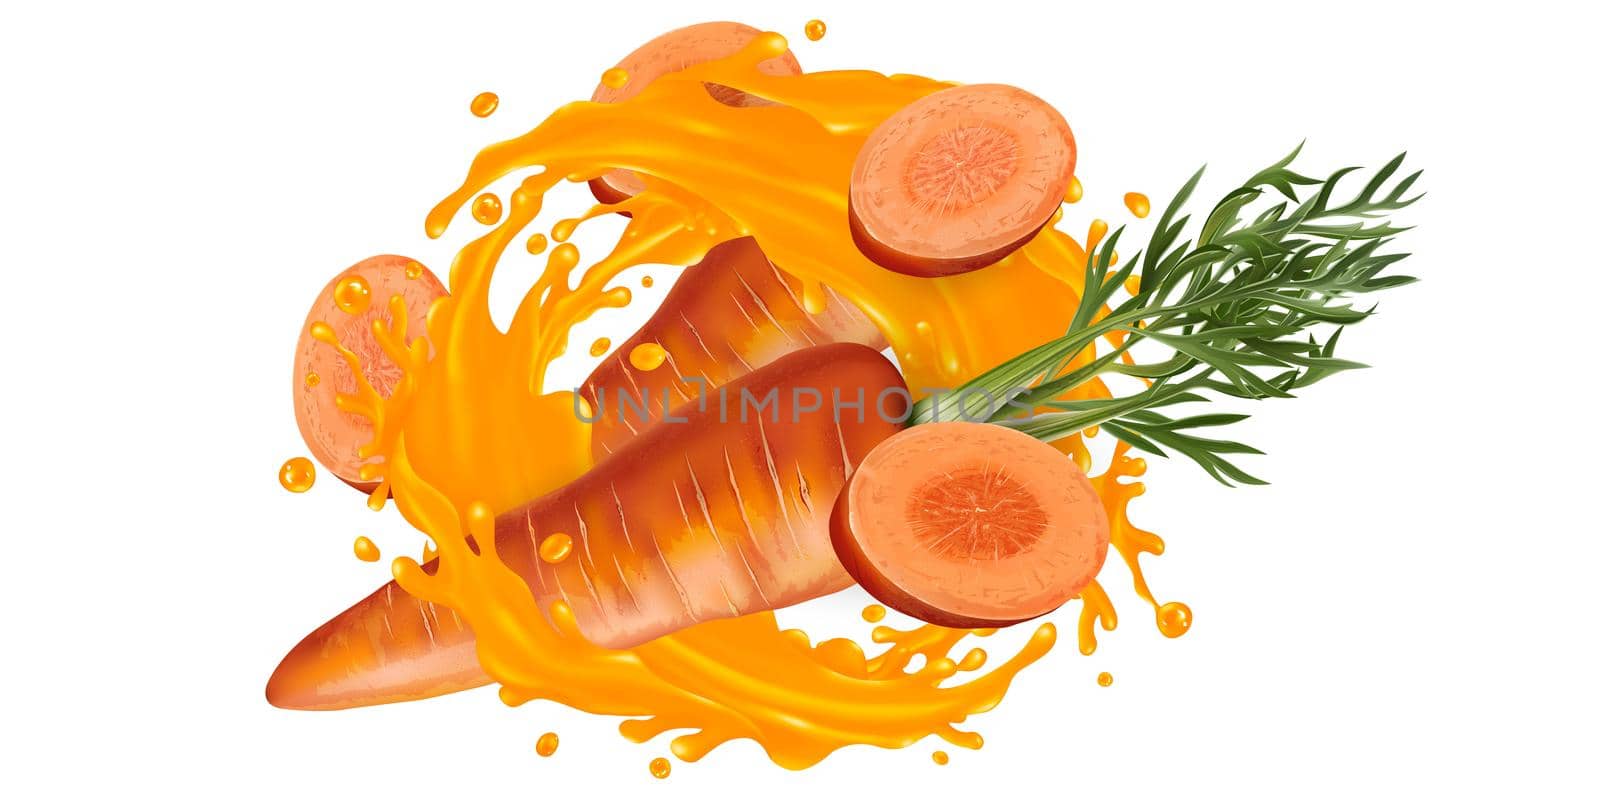 Fresh carrots and a splash of vegetable juice on a white background. Realistic style illustration.